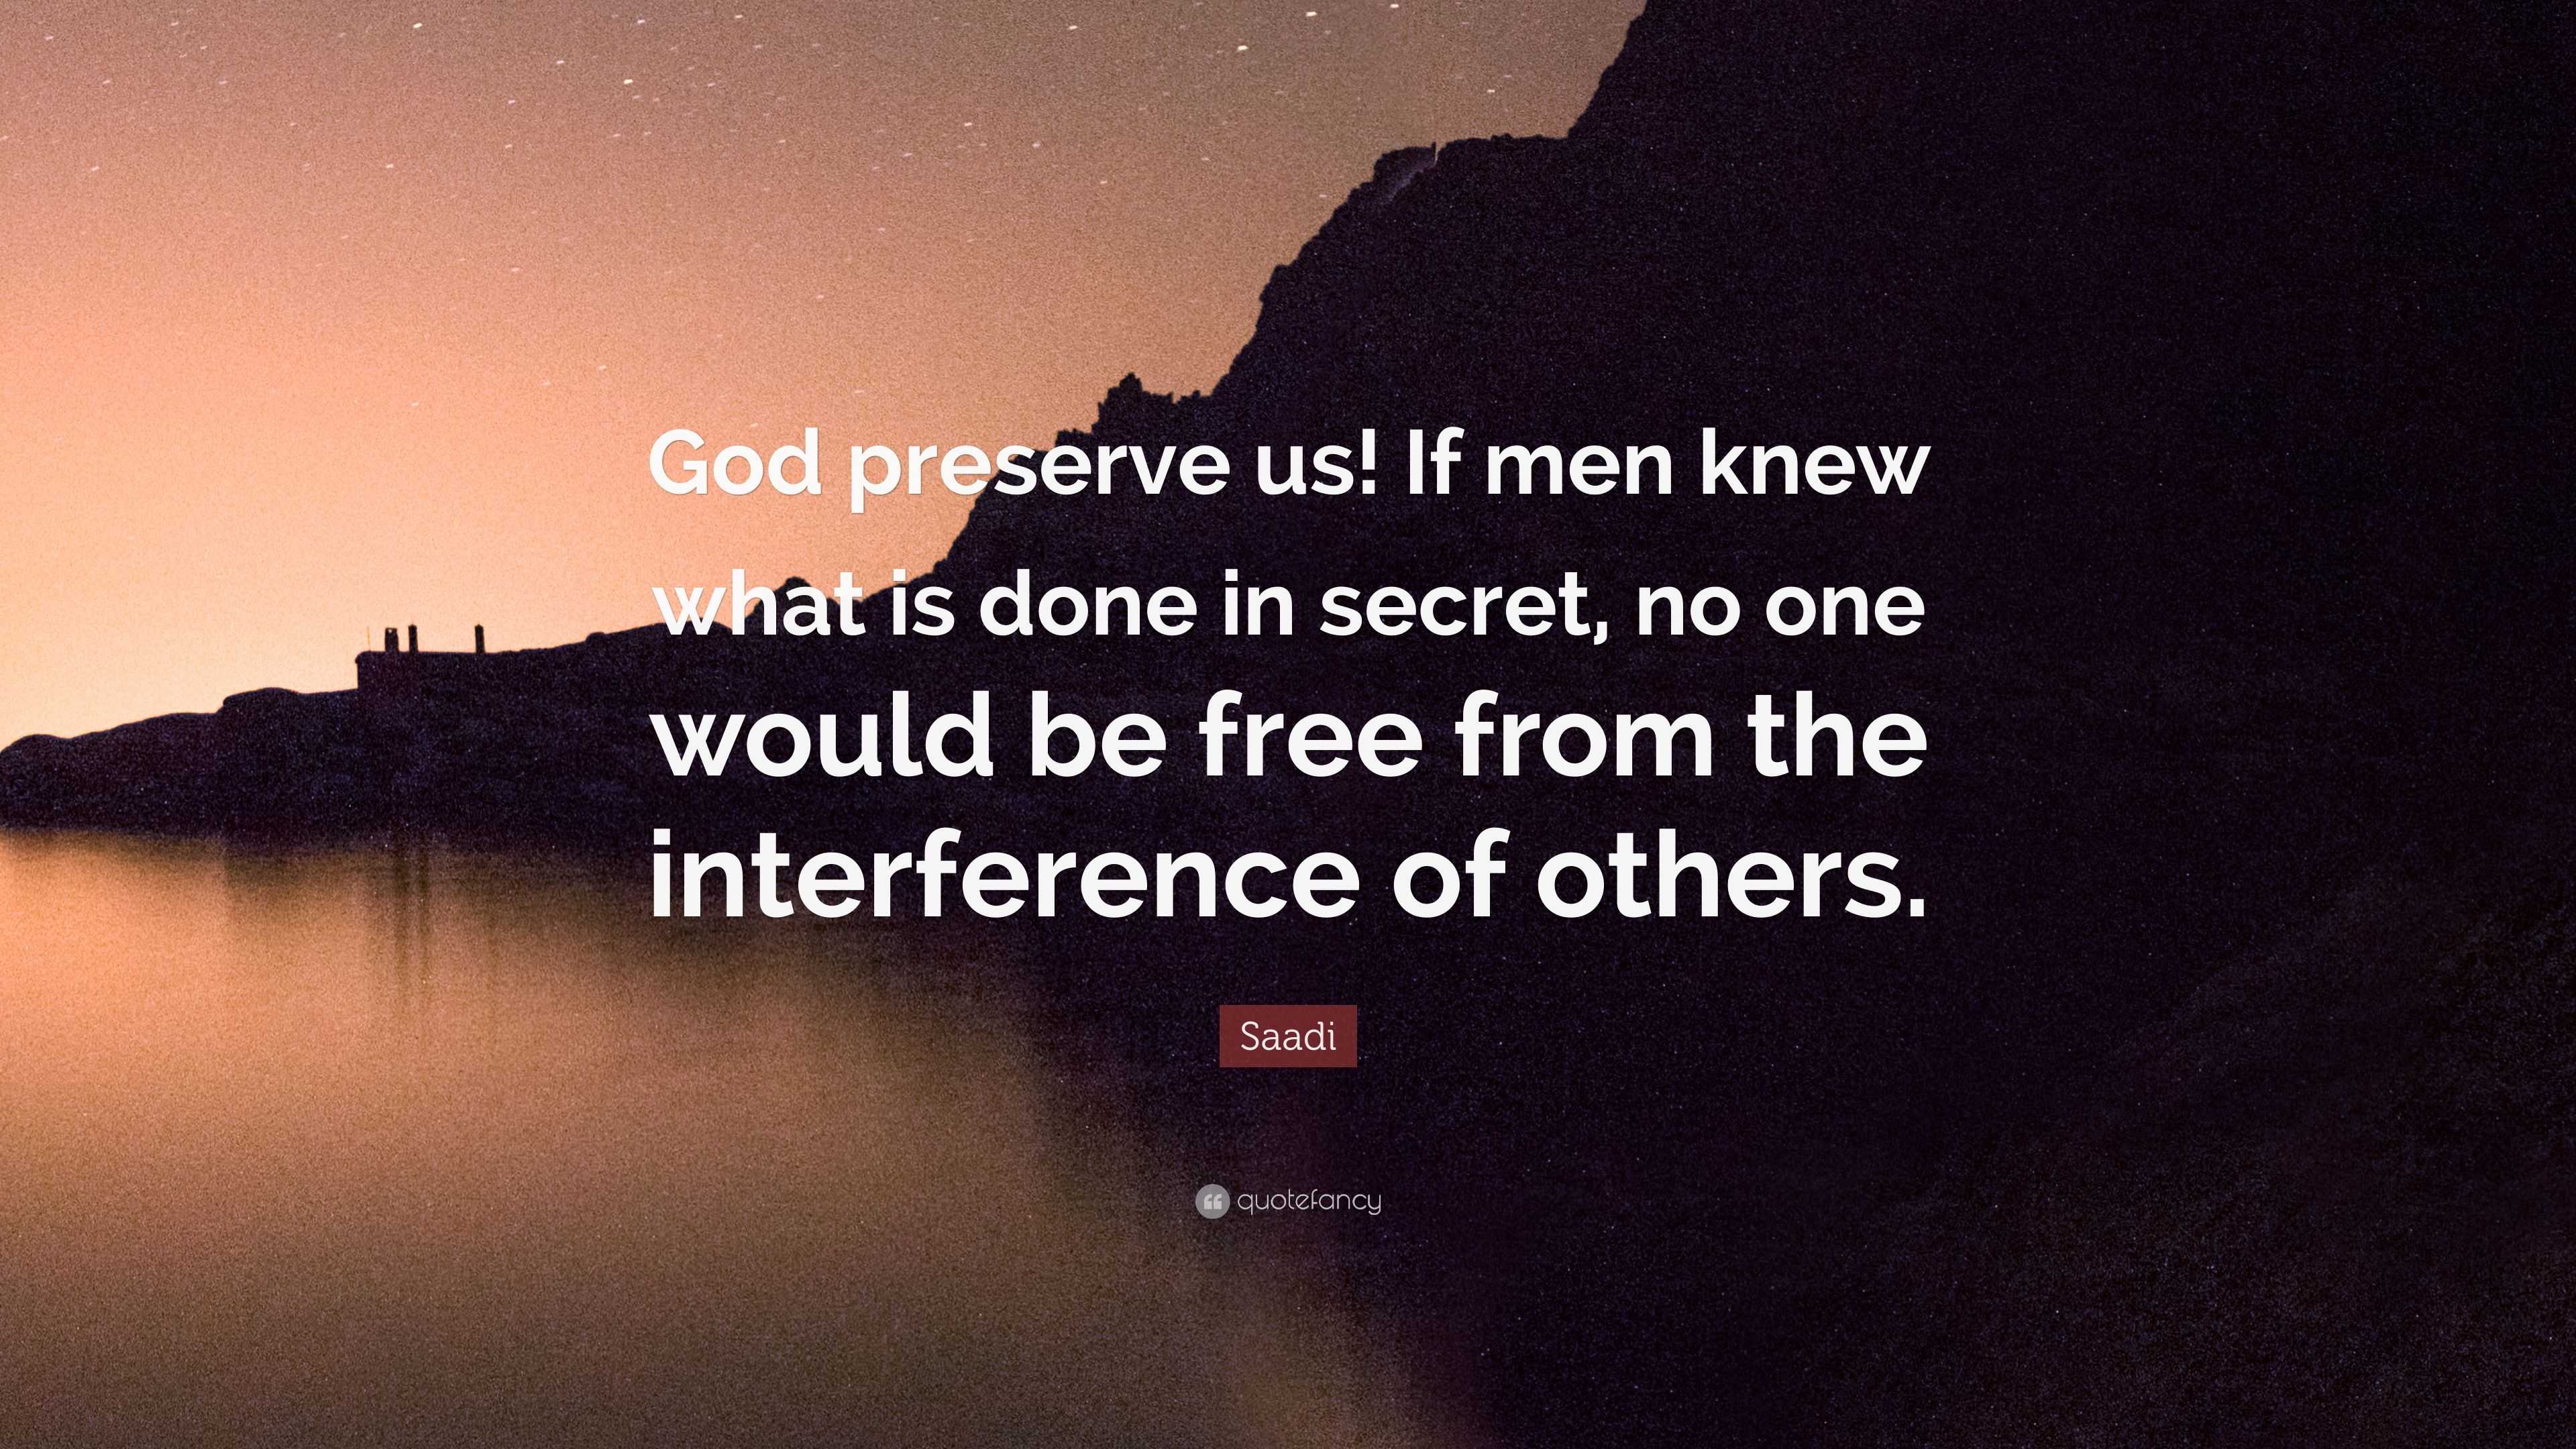 Saadi Quote: “God preserve us! If men knew what is done in secret, no ...